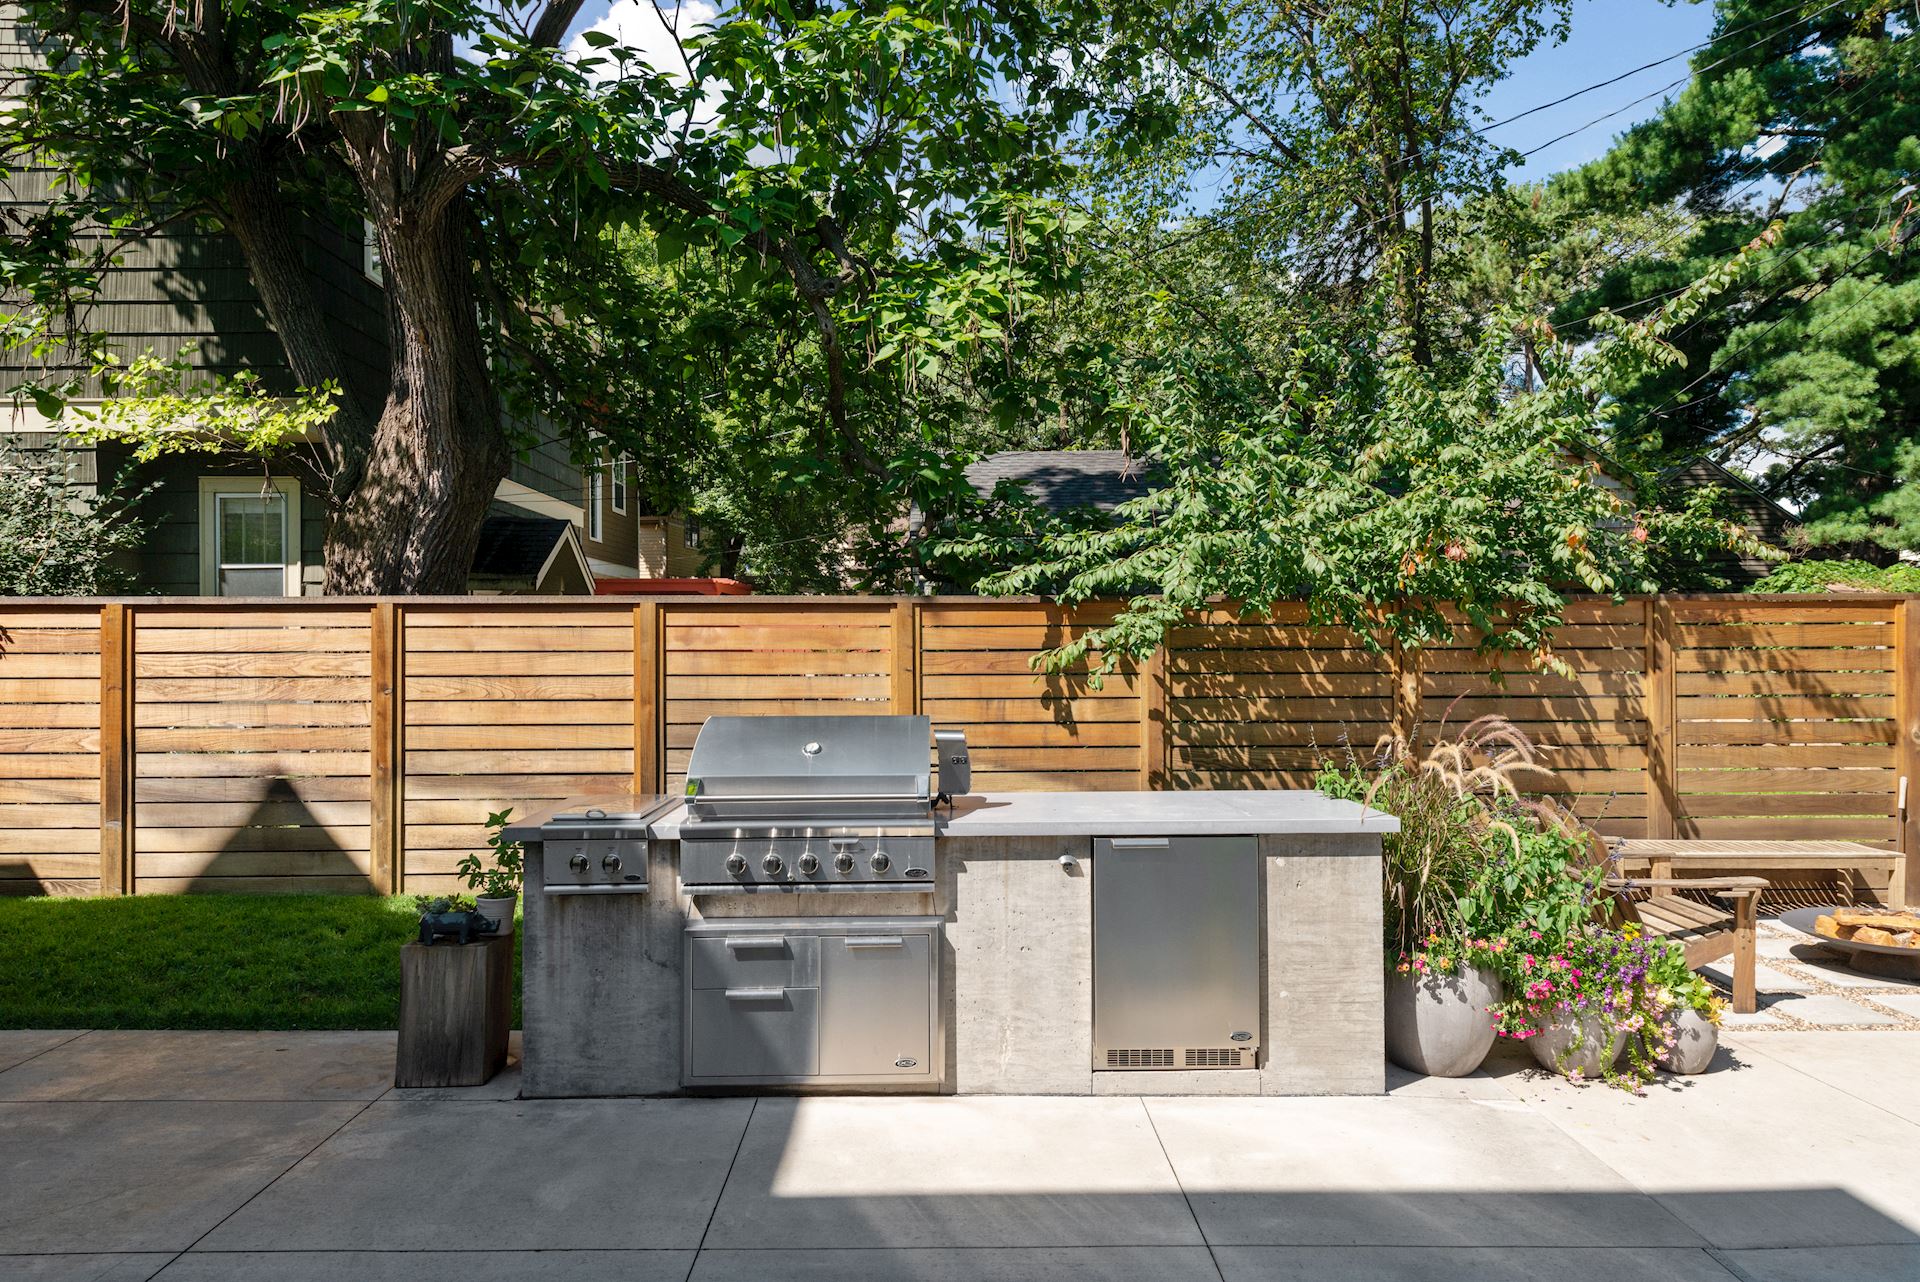 A concrete patio with a grill.